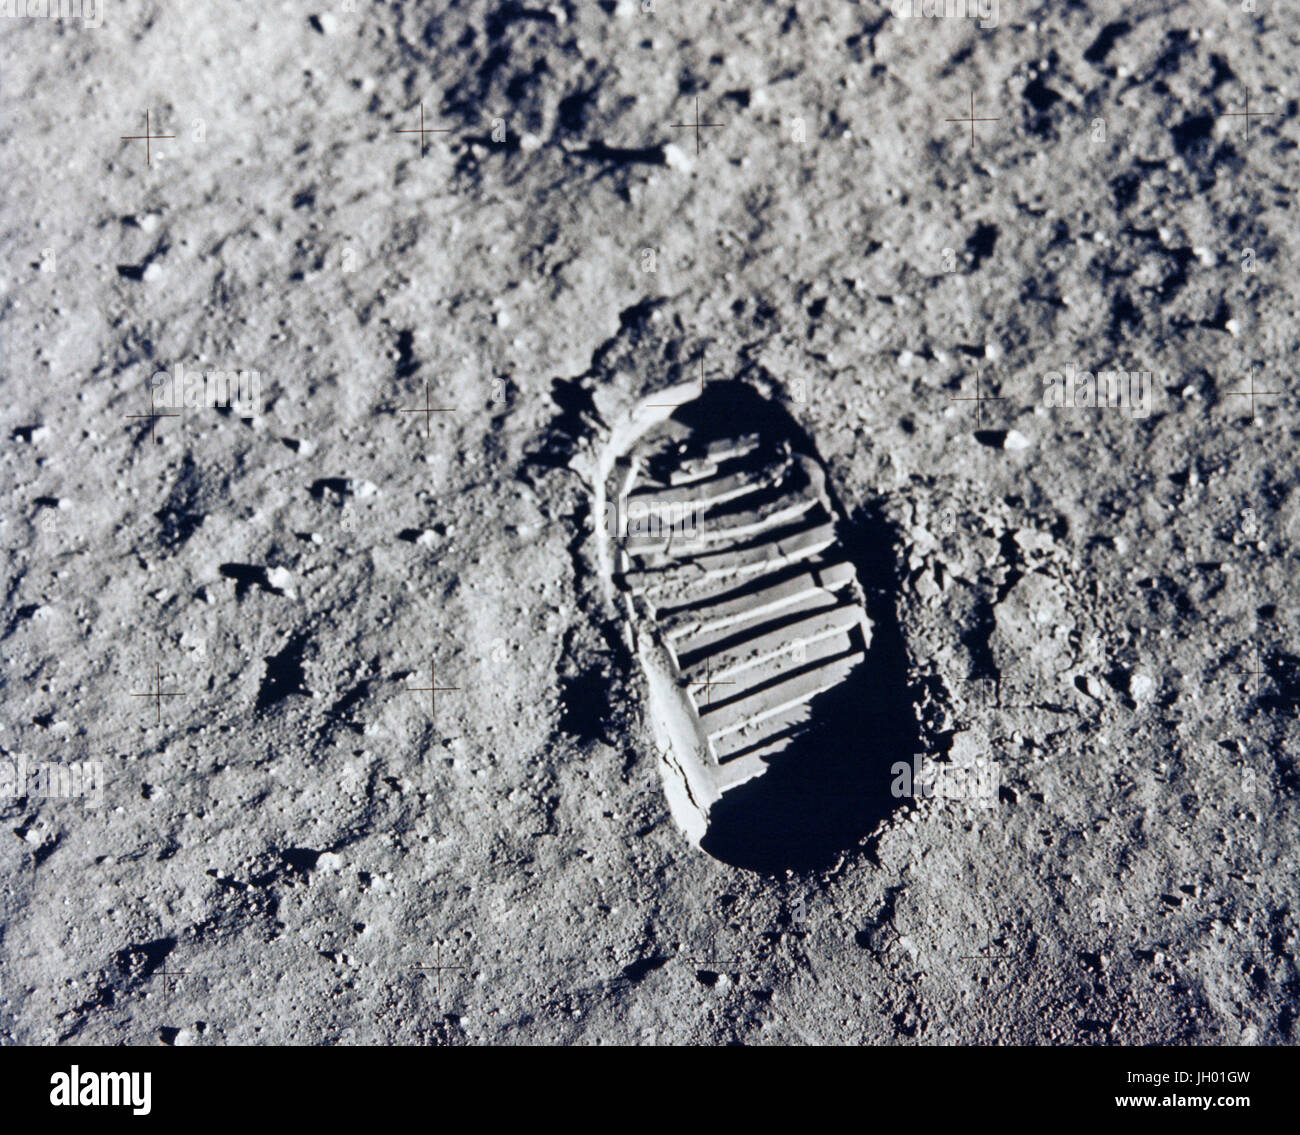 One of the first steps taken on the Moon, this is an image of Buzz Aldrin's bootprint from the Apollo 11 mission. Neil Armstrong and Buzz Aldrin walked on the Moon on July 20, 1969. Stock Photo